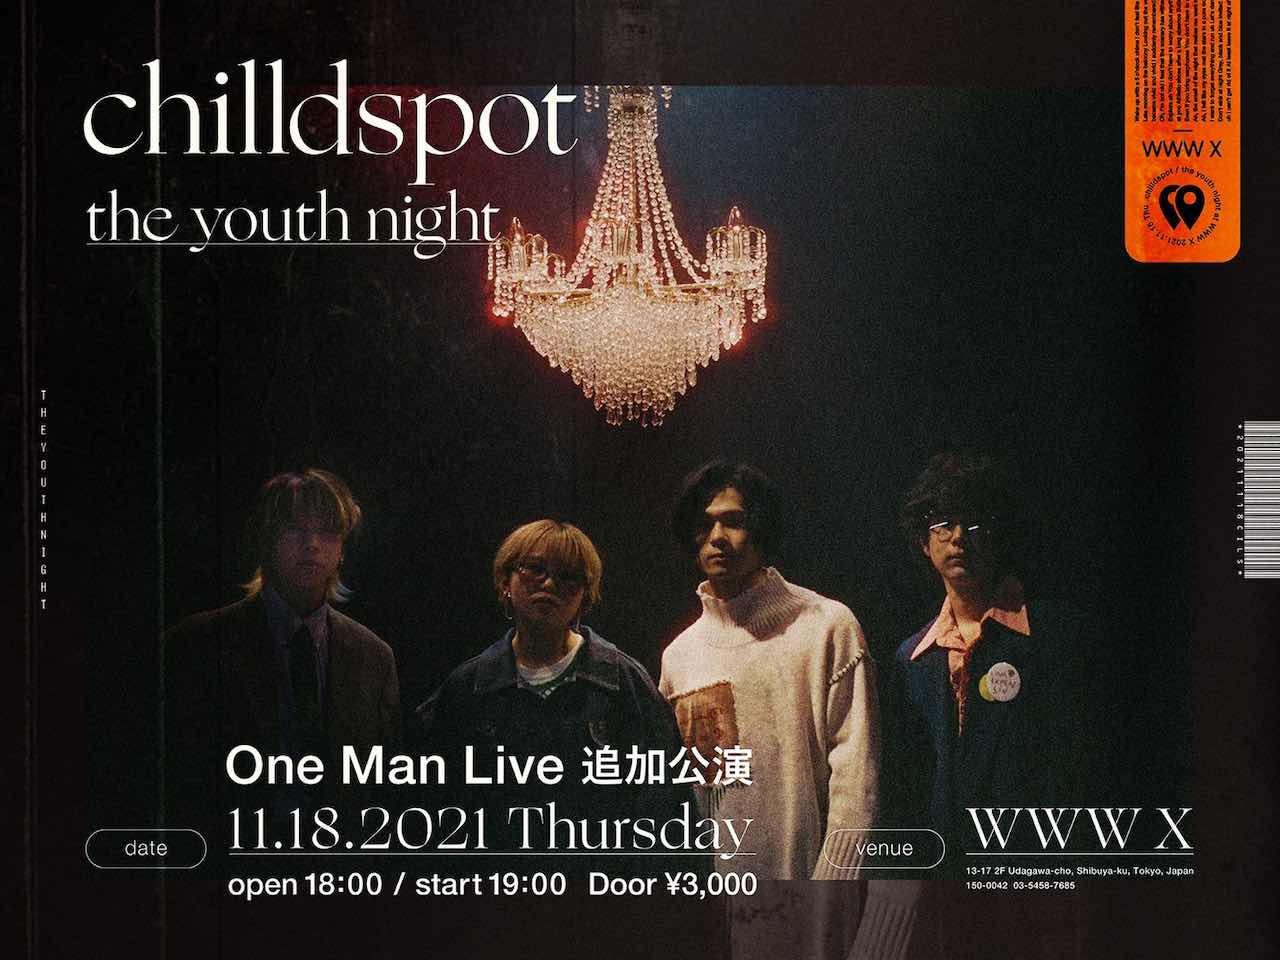 chilldspot、One man live "the youth night"チケット即完につき追加公演が決定！